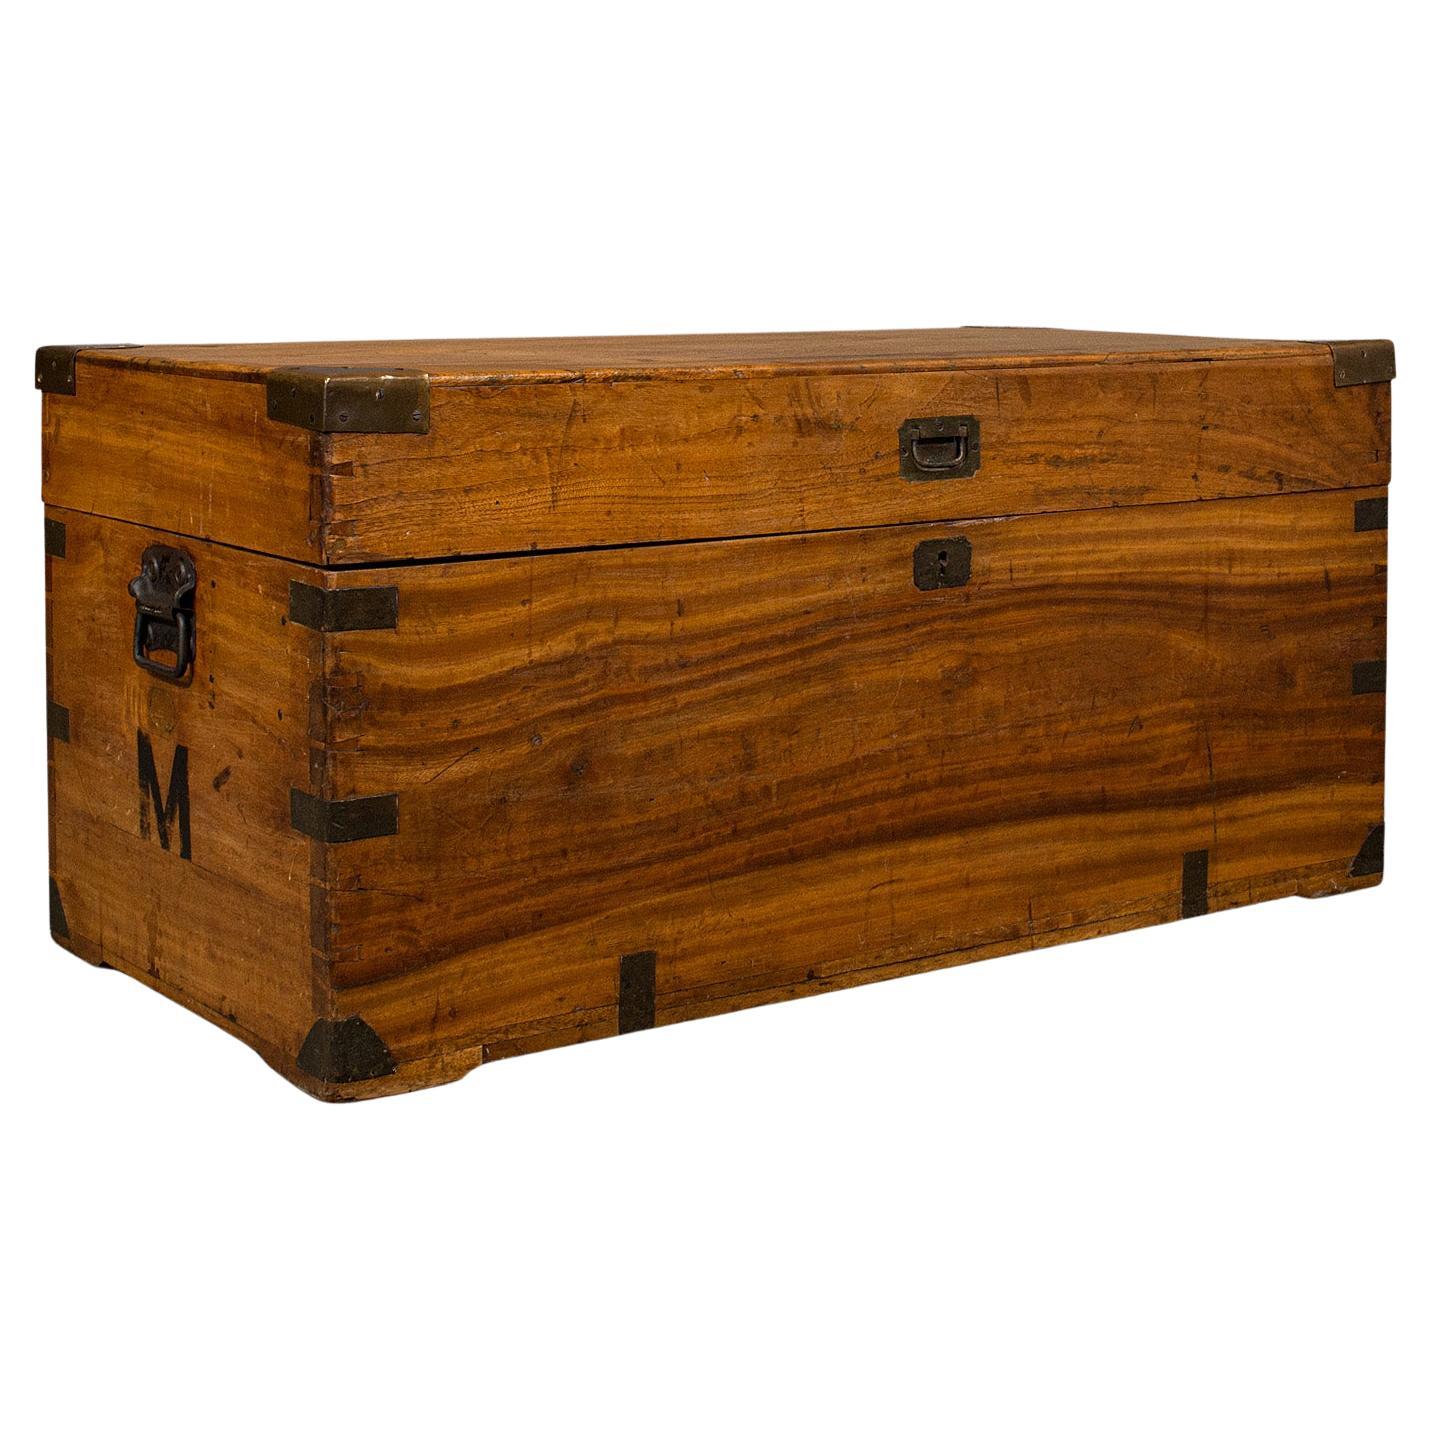 Vintage Campaign Chest, English, Camphorwood, Military Travel Trunk, Circa 1930 For Sale